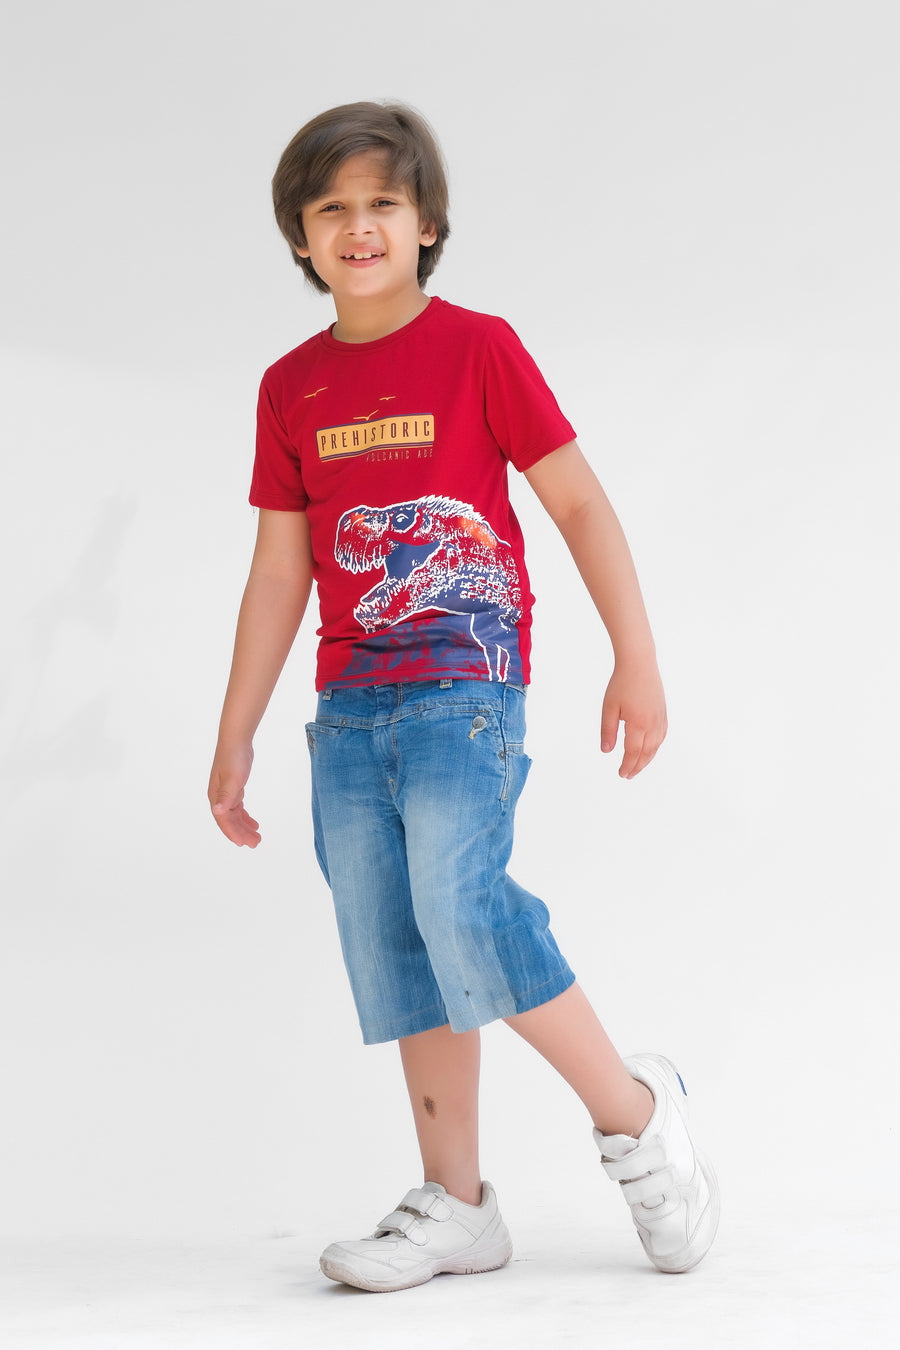 Prehistoric Volcanic Age - Half Sleeves T-shirts For Kids - Maroon